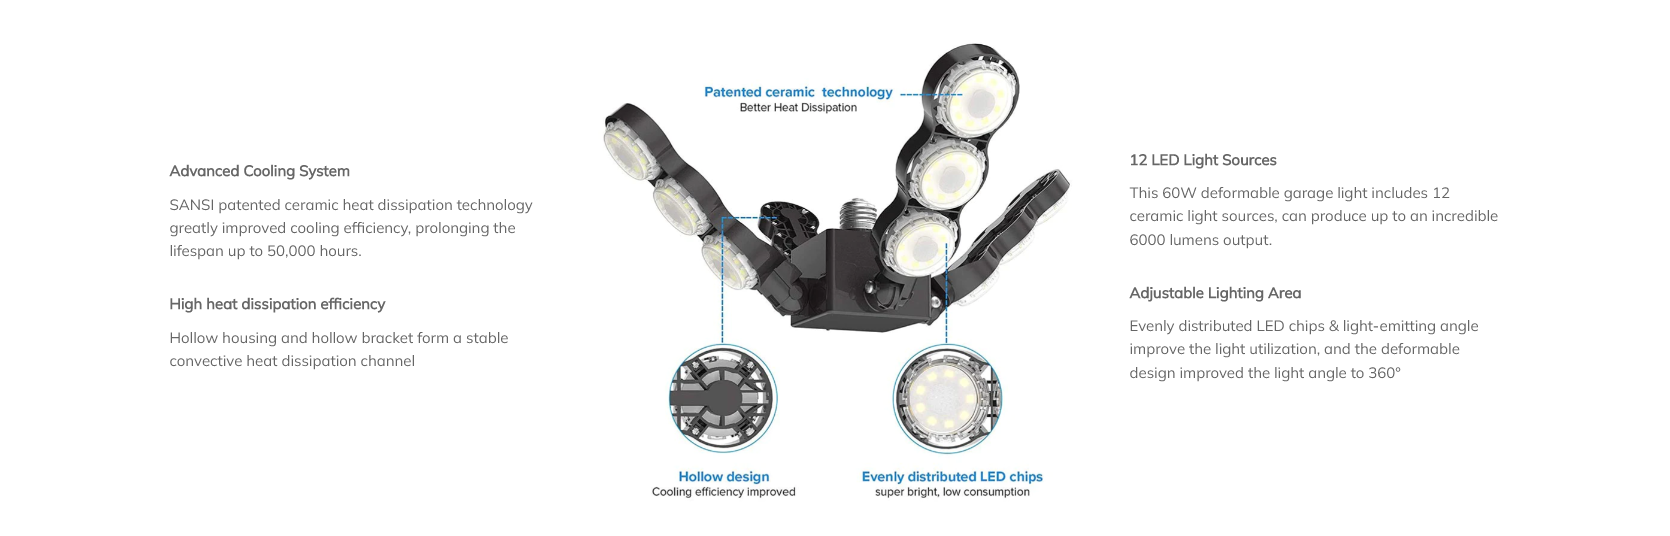 Super Bright & Better Lighting Distribution：60W daylight LED garage light has a super bright 6000 lumens output. Each LED chip has a 120° lighting beam angle ensuring the downwards light is even to the edges, unlike other brands. When installing at an 8ft height, it can illuminate an 700-800ft² area for commercial bay lighting.